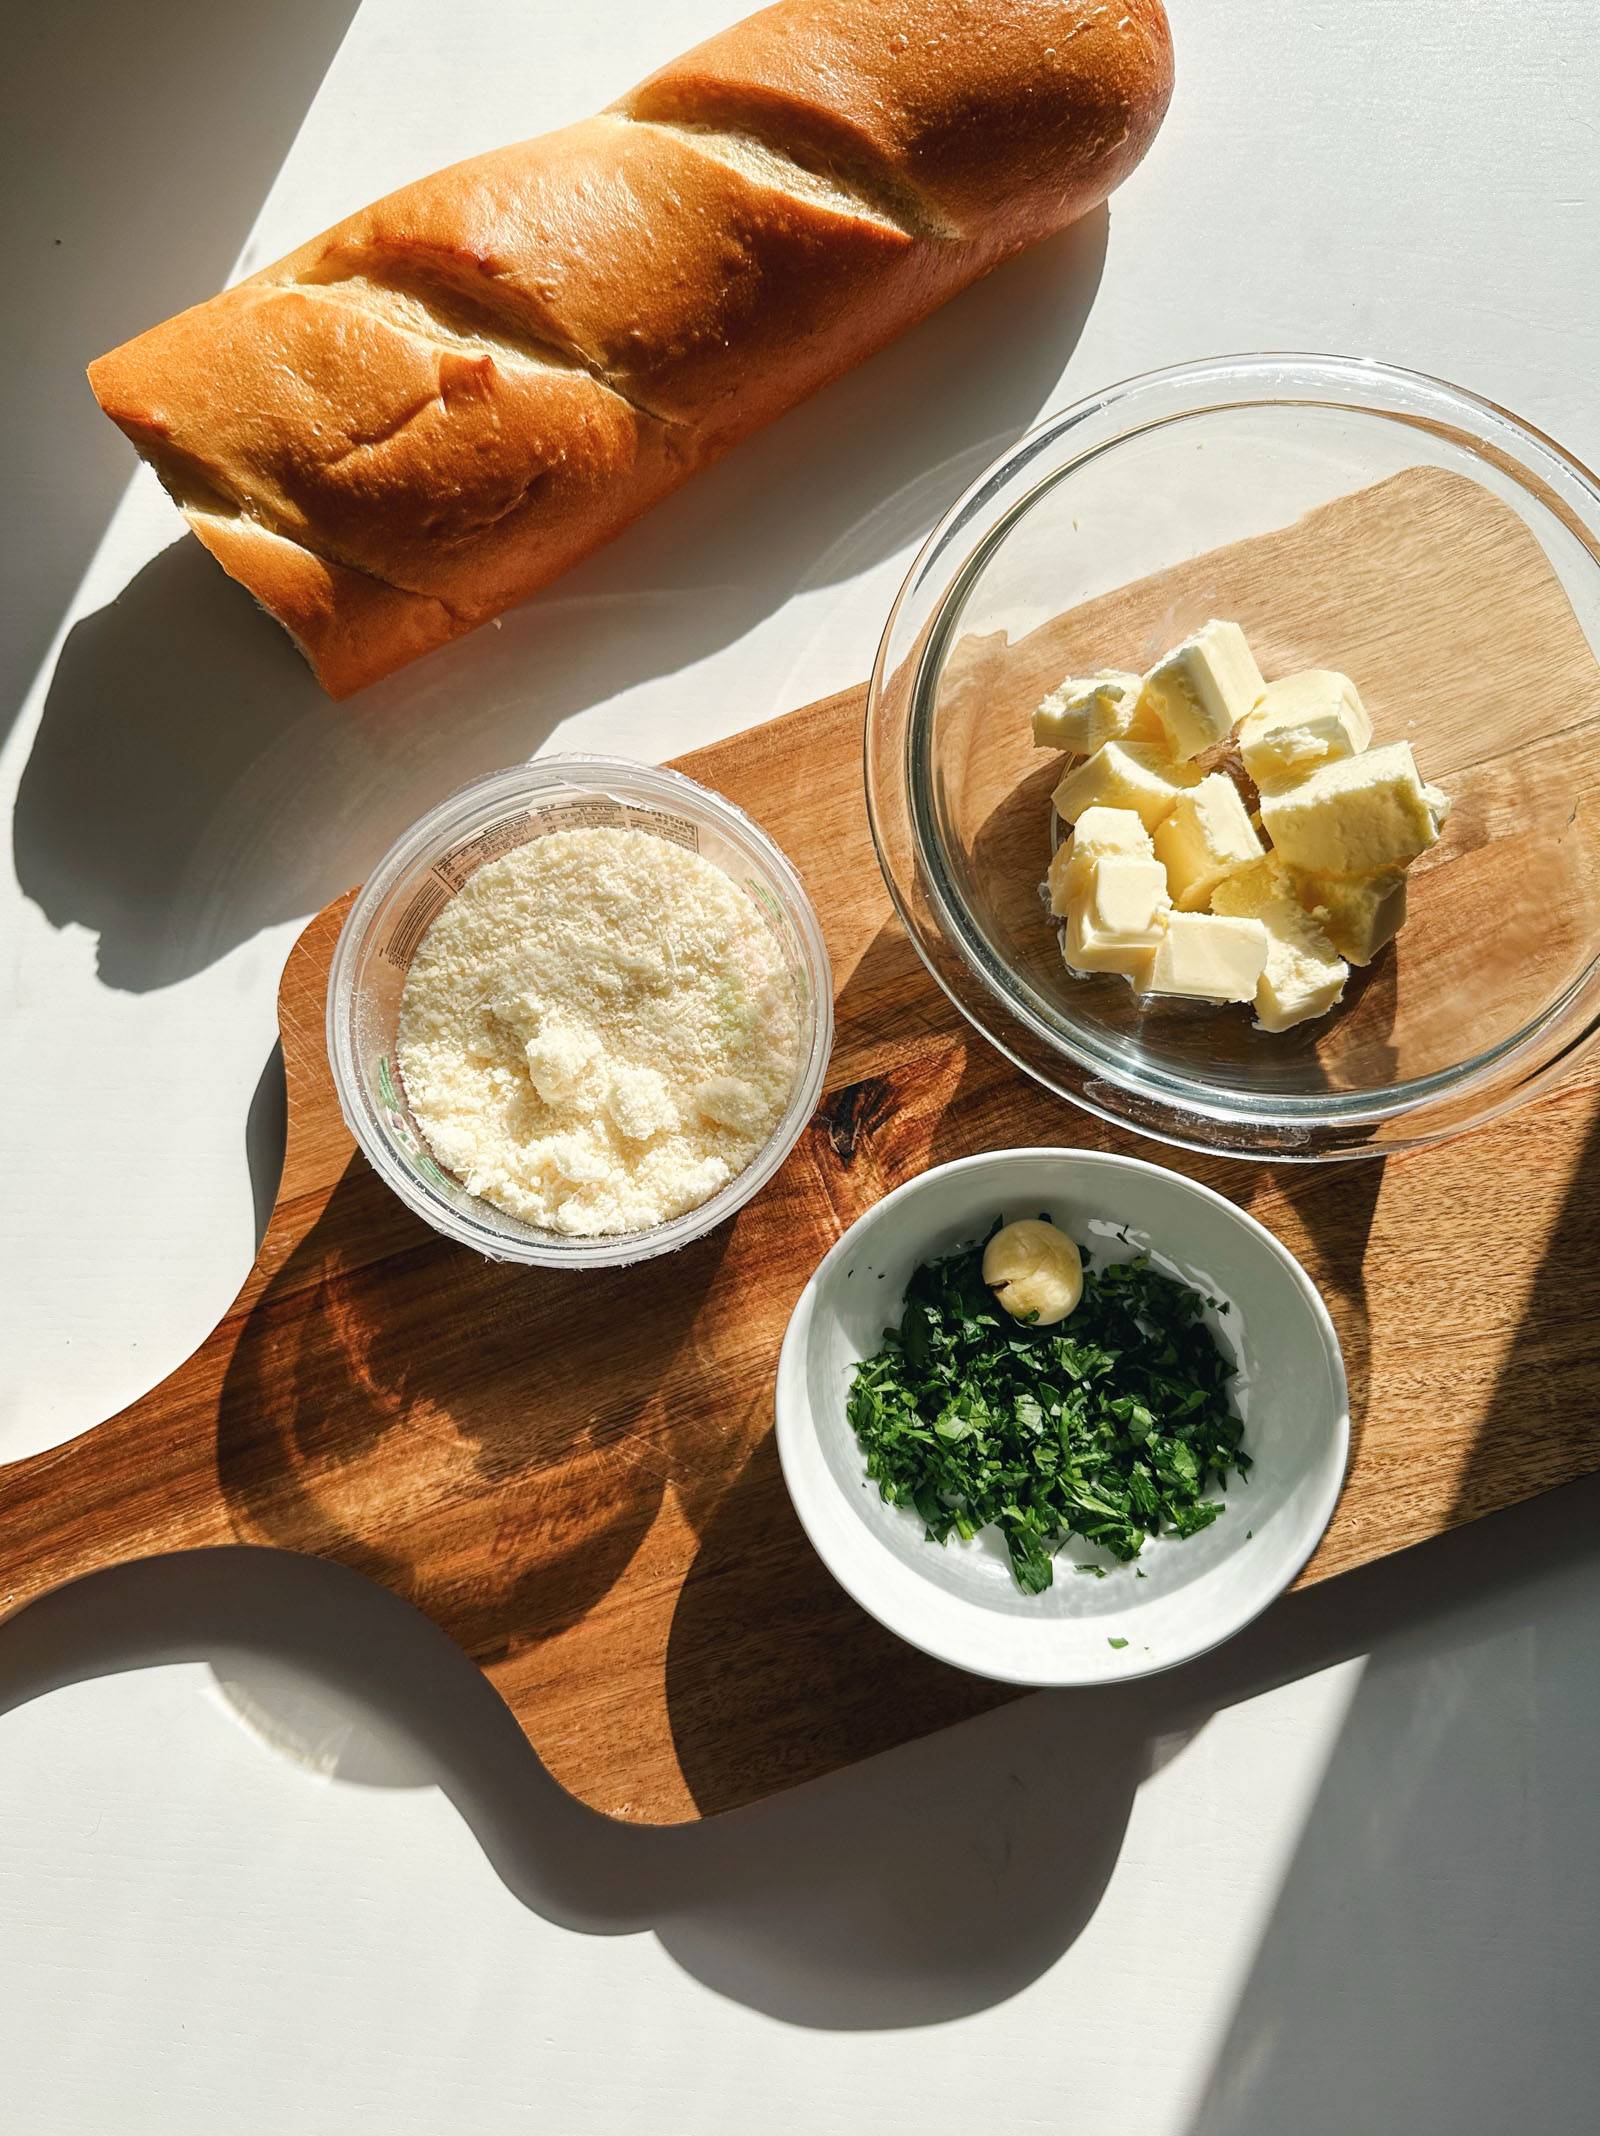 Ingredients for garlic bread - a baguette, parmesan cheese, butter, garlic, and parsley.